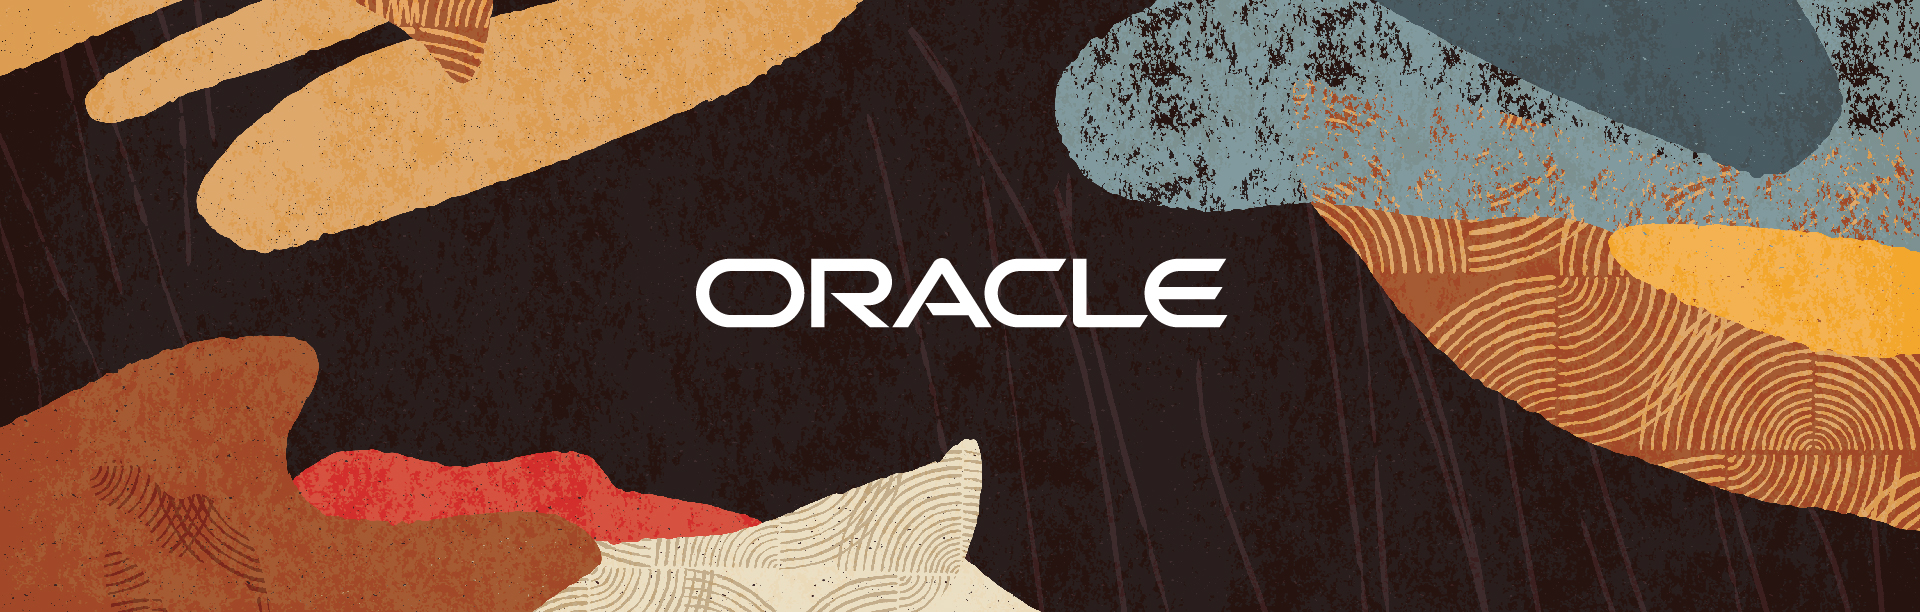 banner_oracle-sm-01